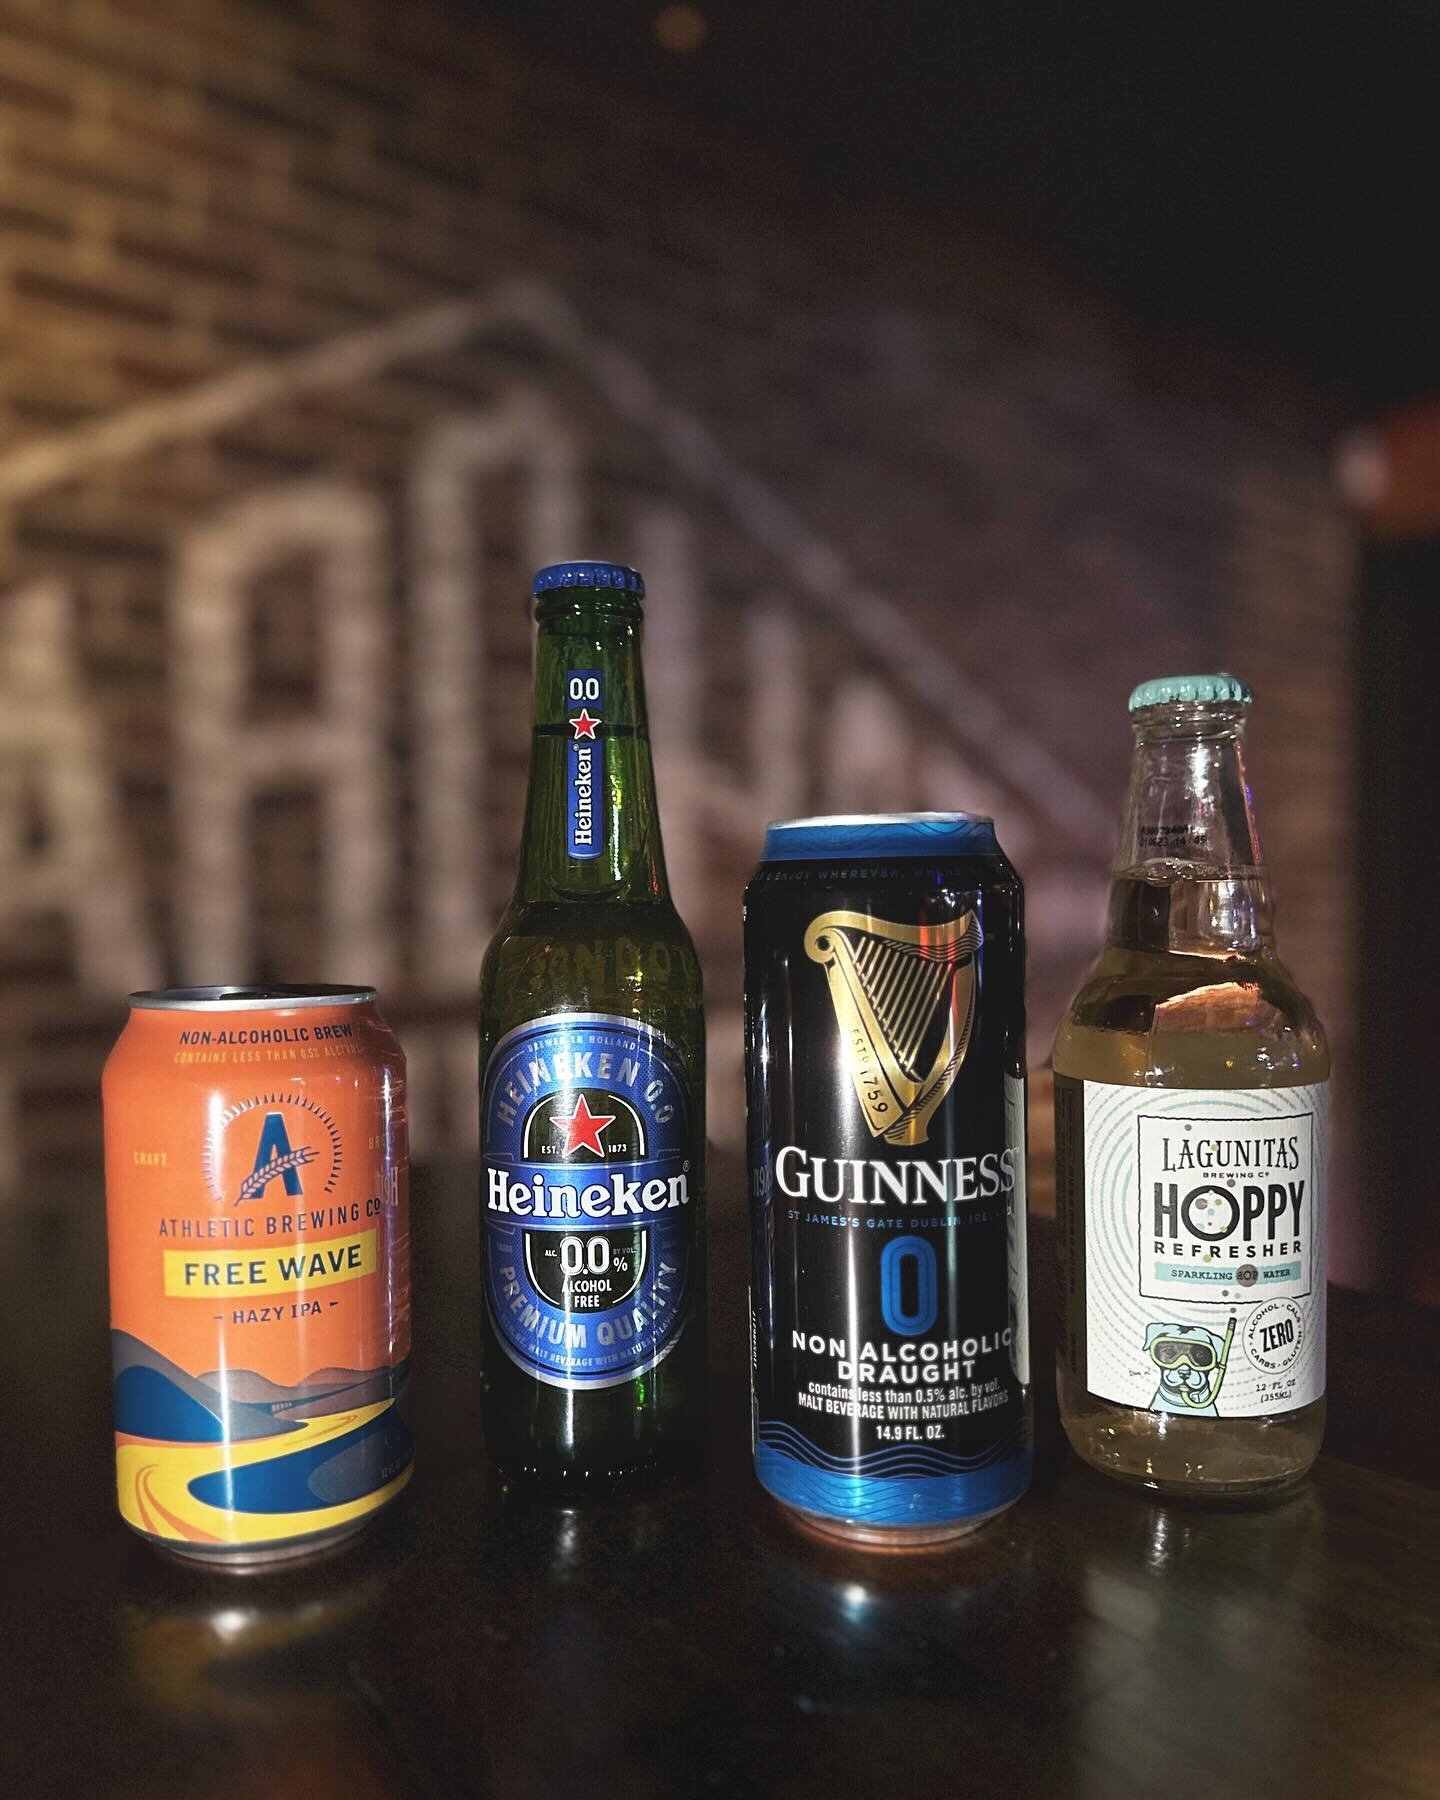 🌵Keeping your January dry? We&rsquo;ve got you covered with a killer selection of N/A options! All of which pair perfectly with a @staytunedburgers burger. 

📷: @walkinspanish 

#hardhatlounge #staytunedburgers #dtlv #lasvegas #nonalcoholicdrink